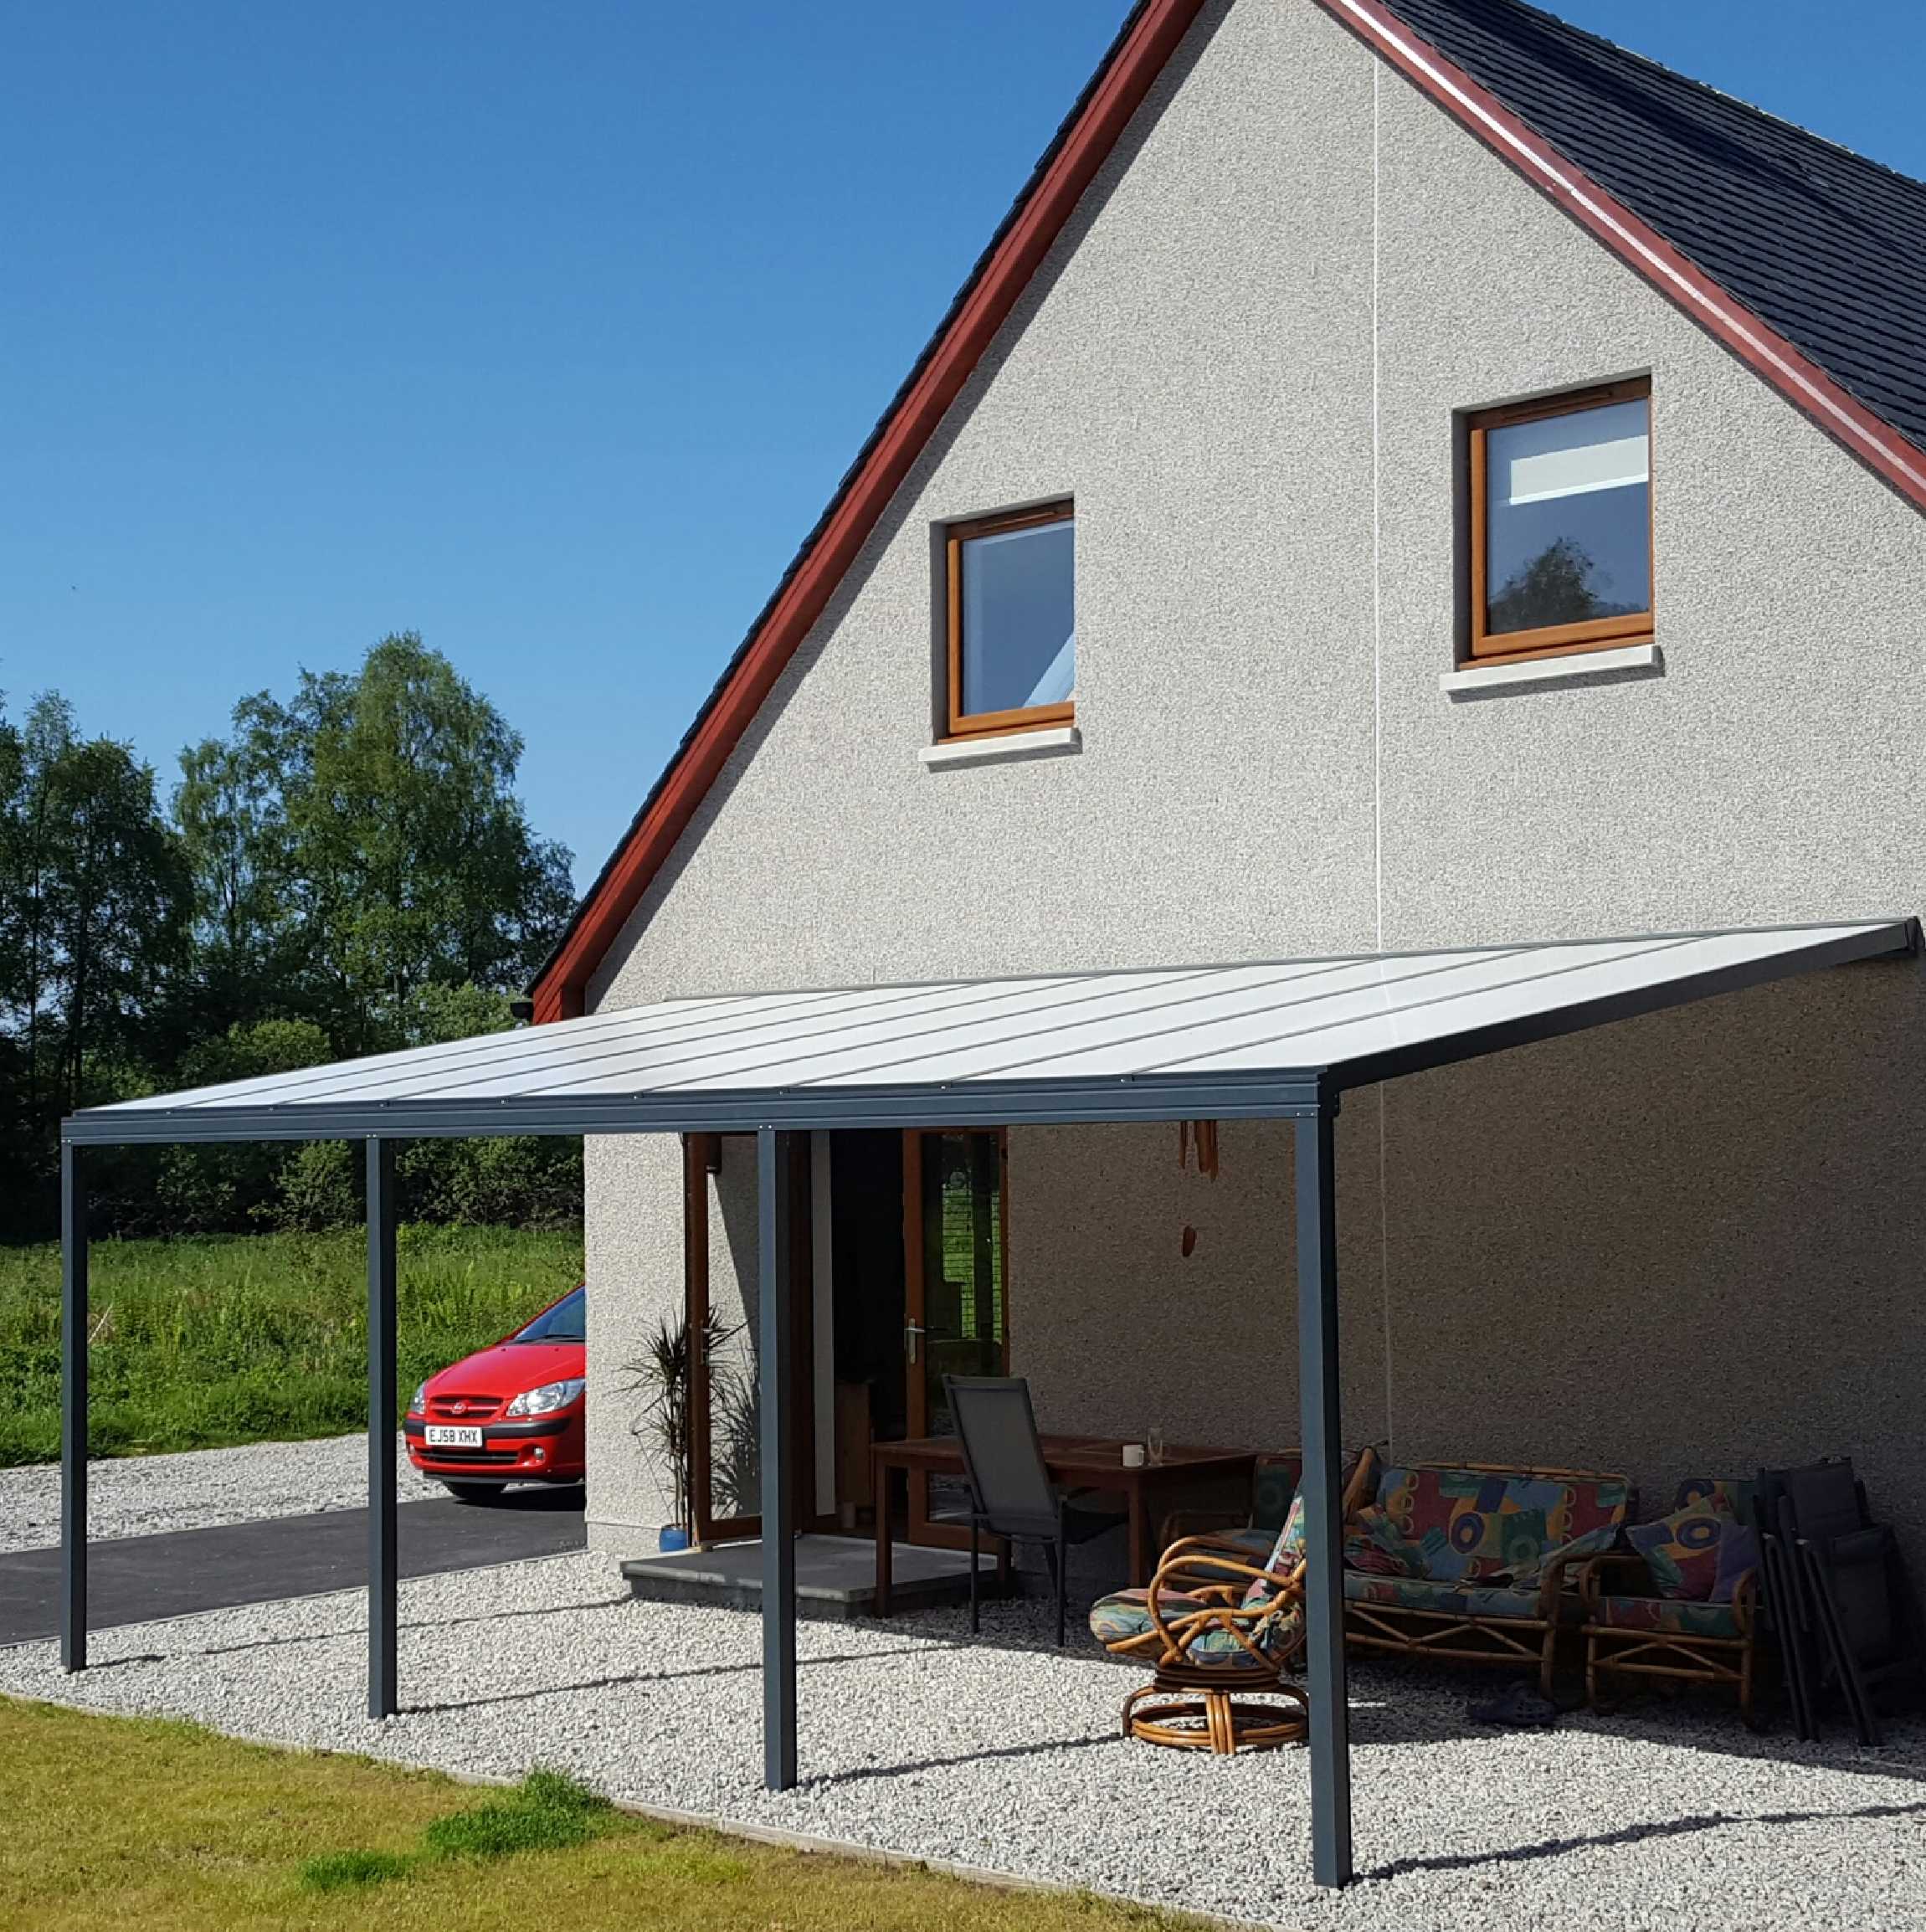 Great selection of SPECIAL OFFER Omega Smart Lean-To Canopy, Anthracite Grey, 16mm Polycarbonate Glazing - 6.0m (W) x 3.0m (P), (3) Supporting Posts